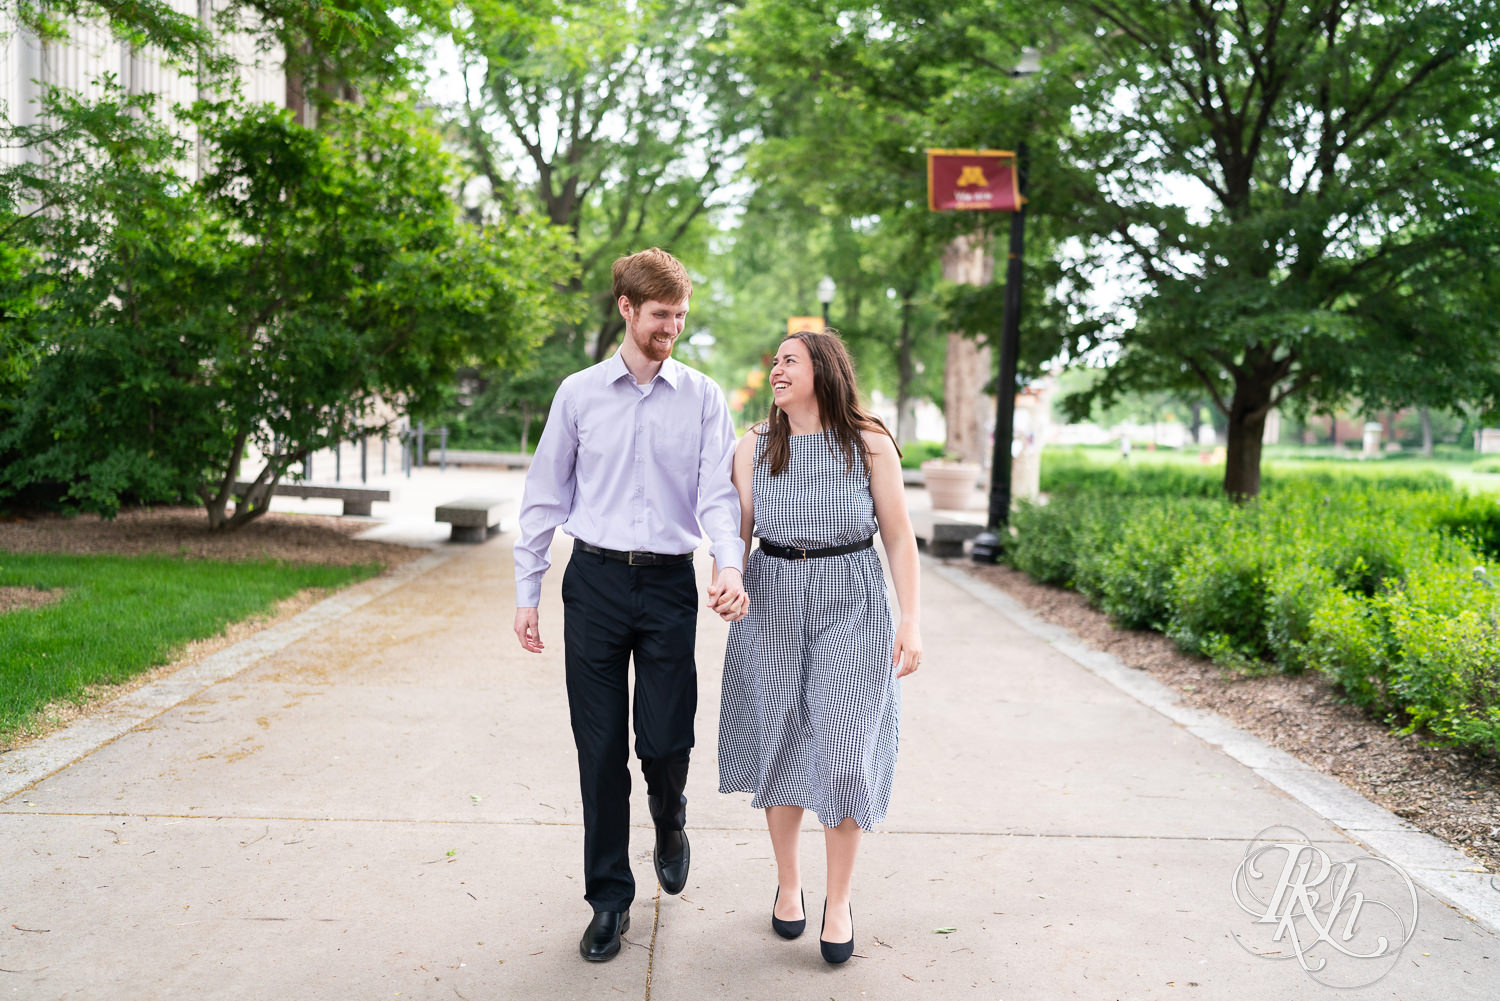 Man and woman walking and laughing during engagement session at University of Minnesota.